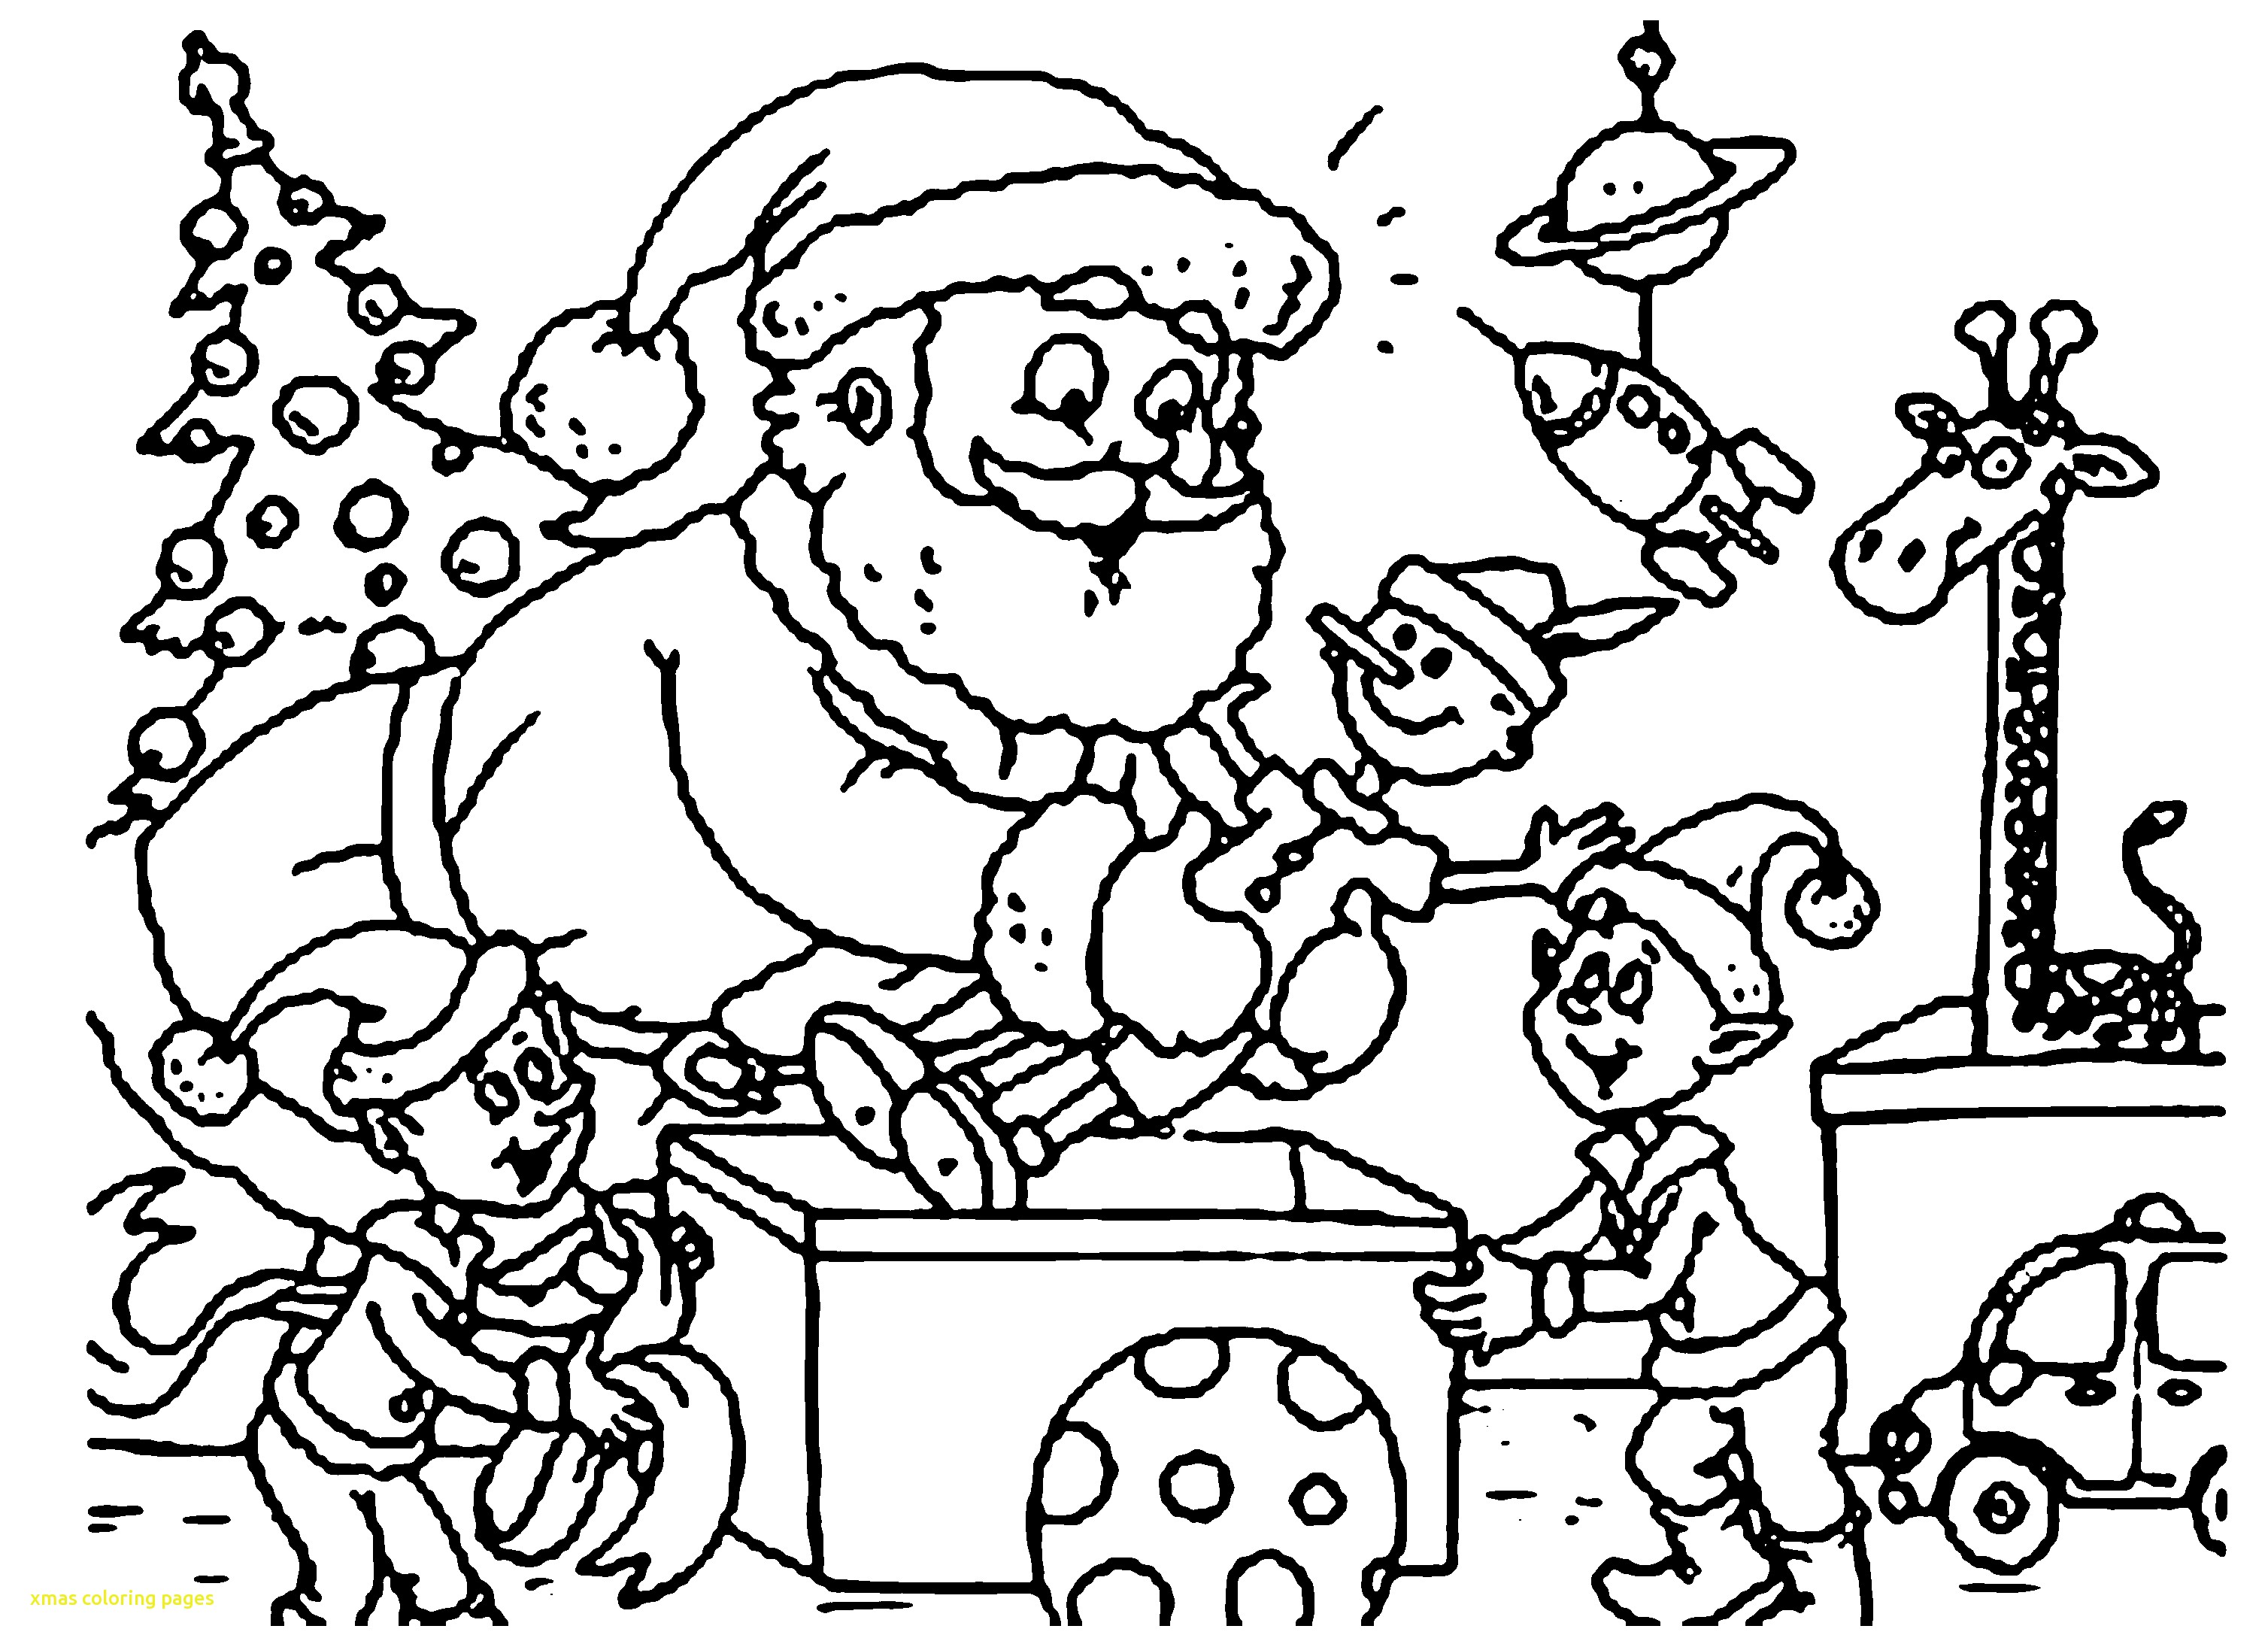 xmas-coloring-pages-at-getcolorings-free-printable-colorings-pages-to-print-and-color